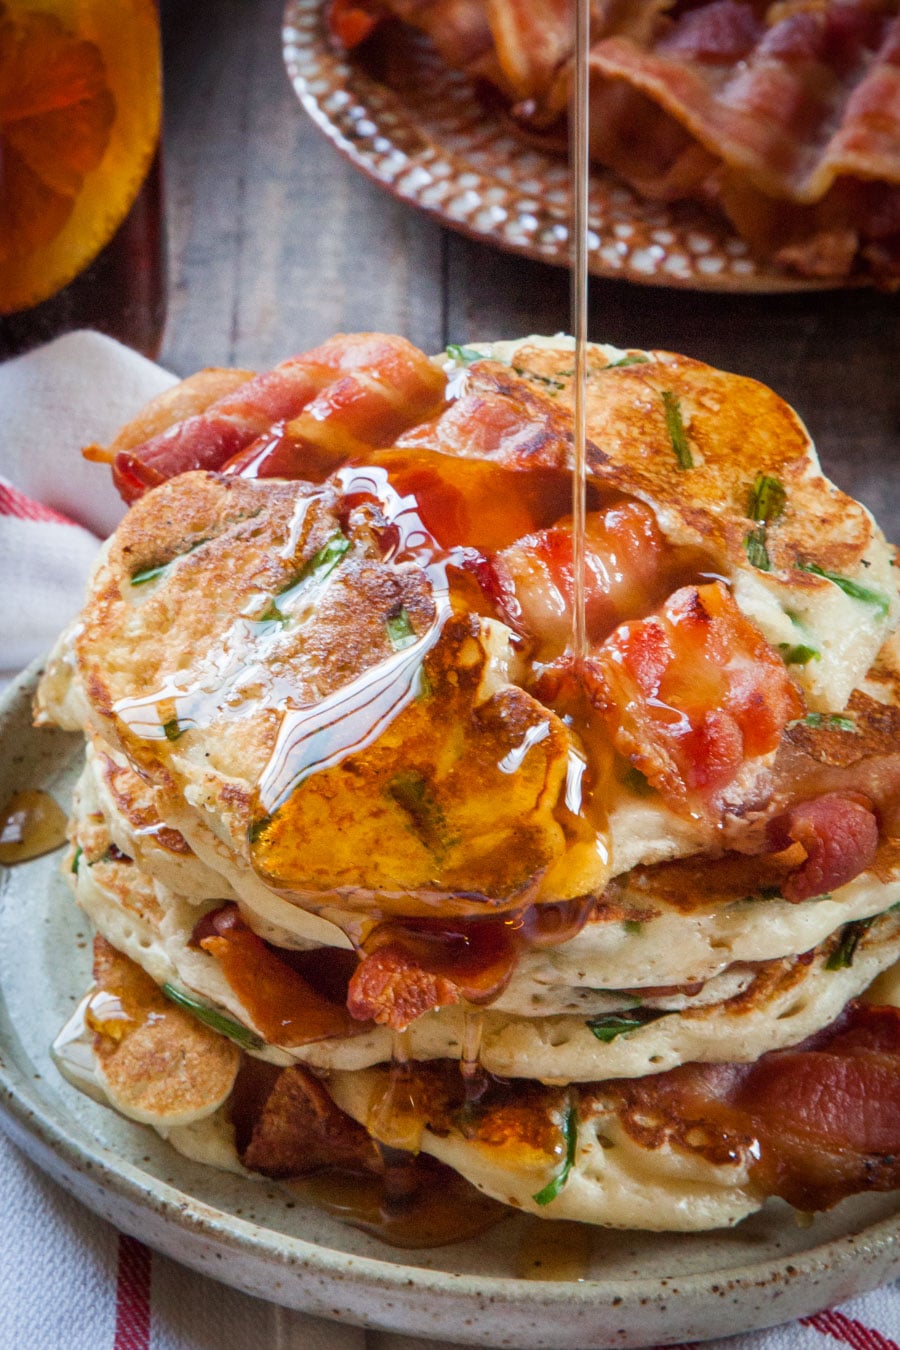 Bacon and Chives pancakes with Farmer John All-Natural Bacon. Photo and recipe by Irvin Lin of Eat the Love.